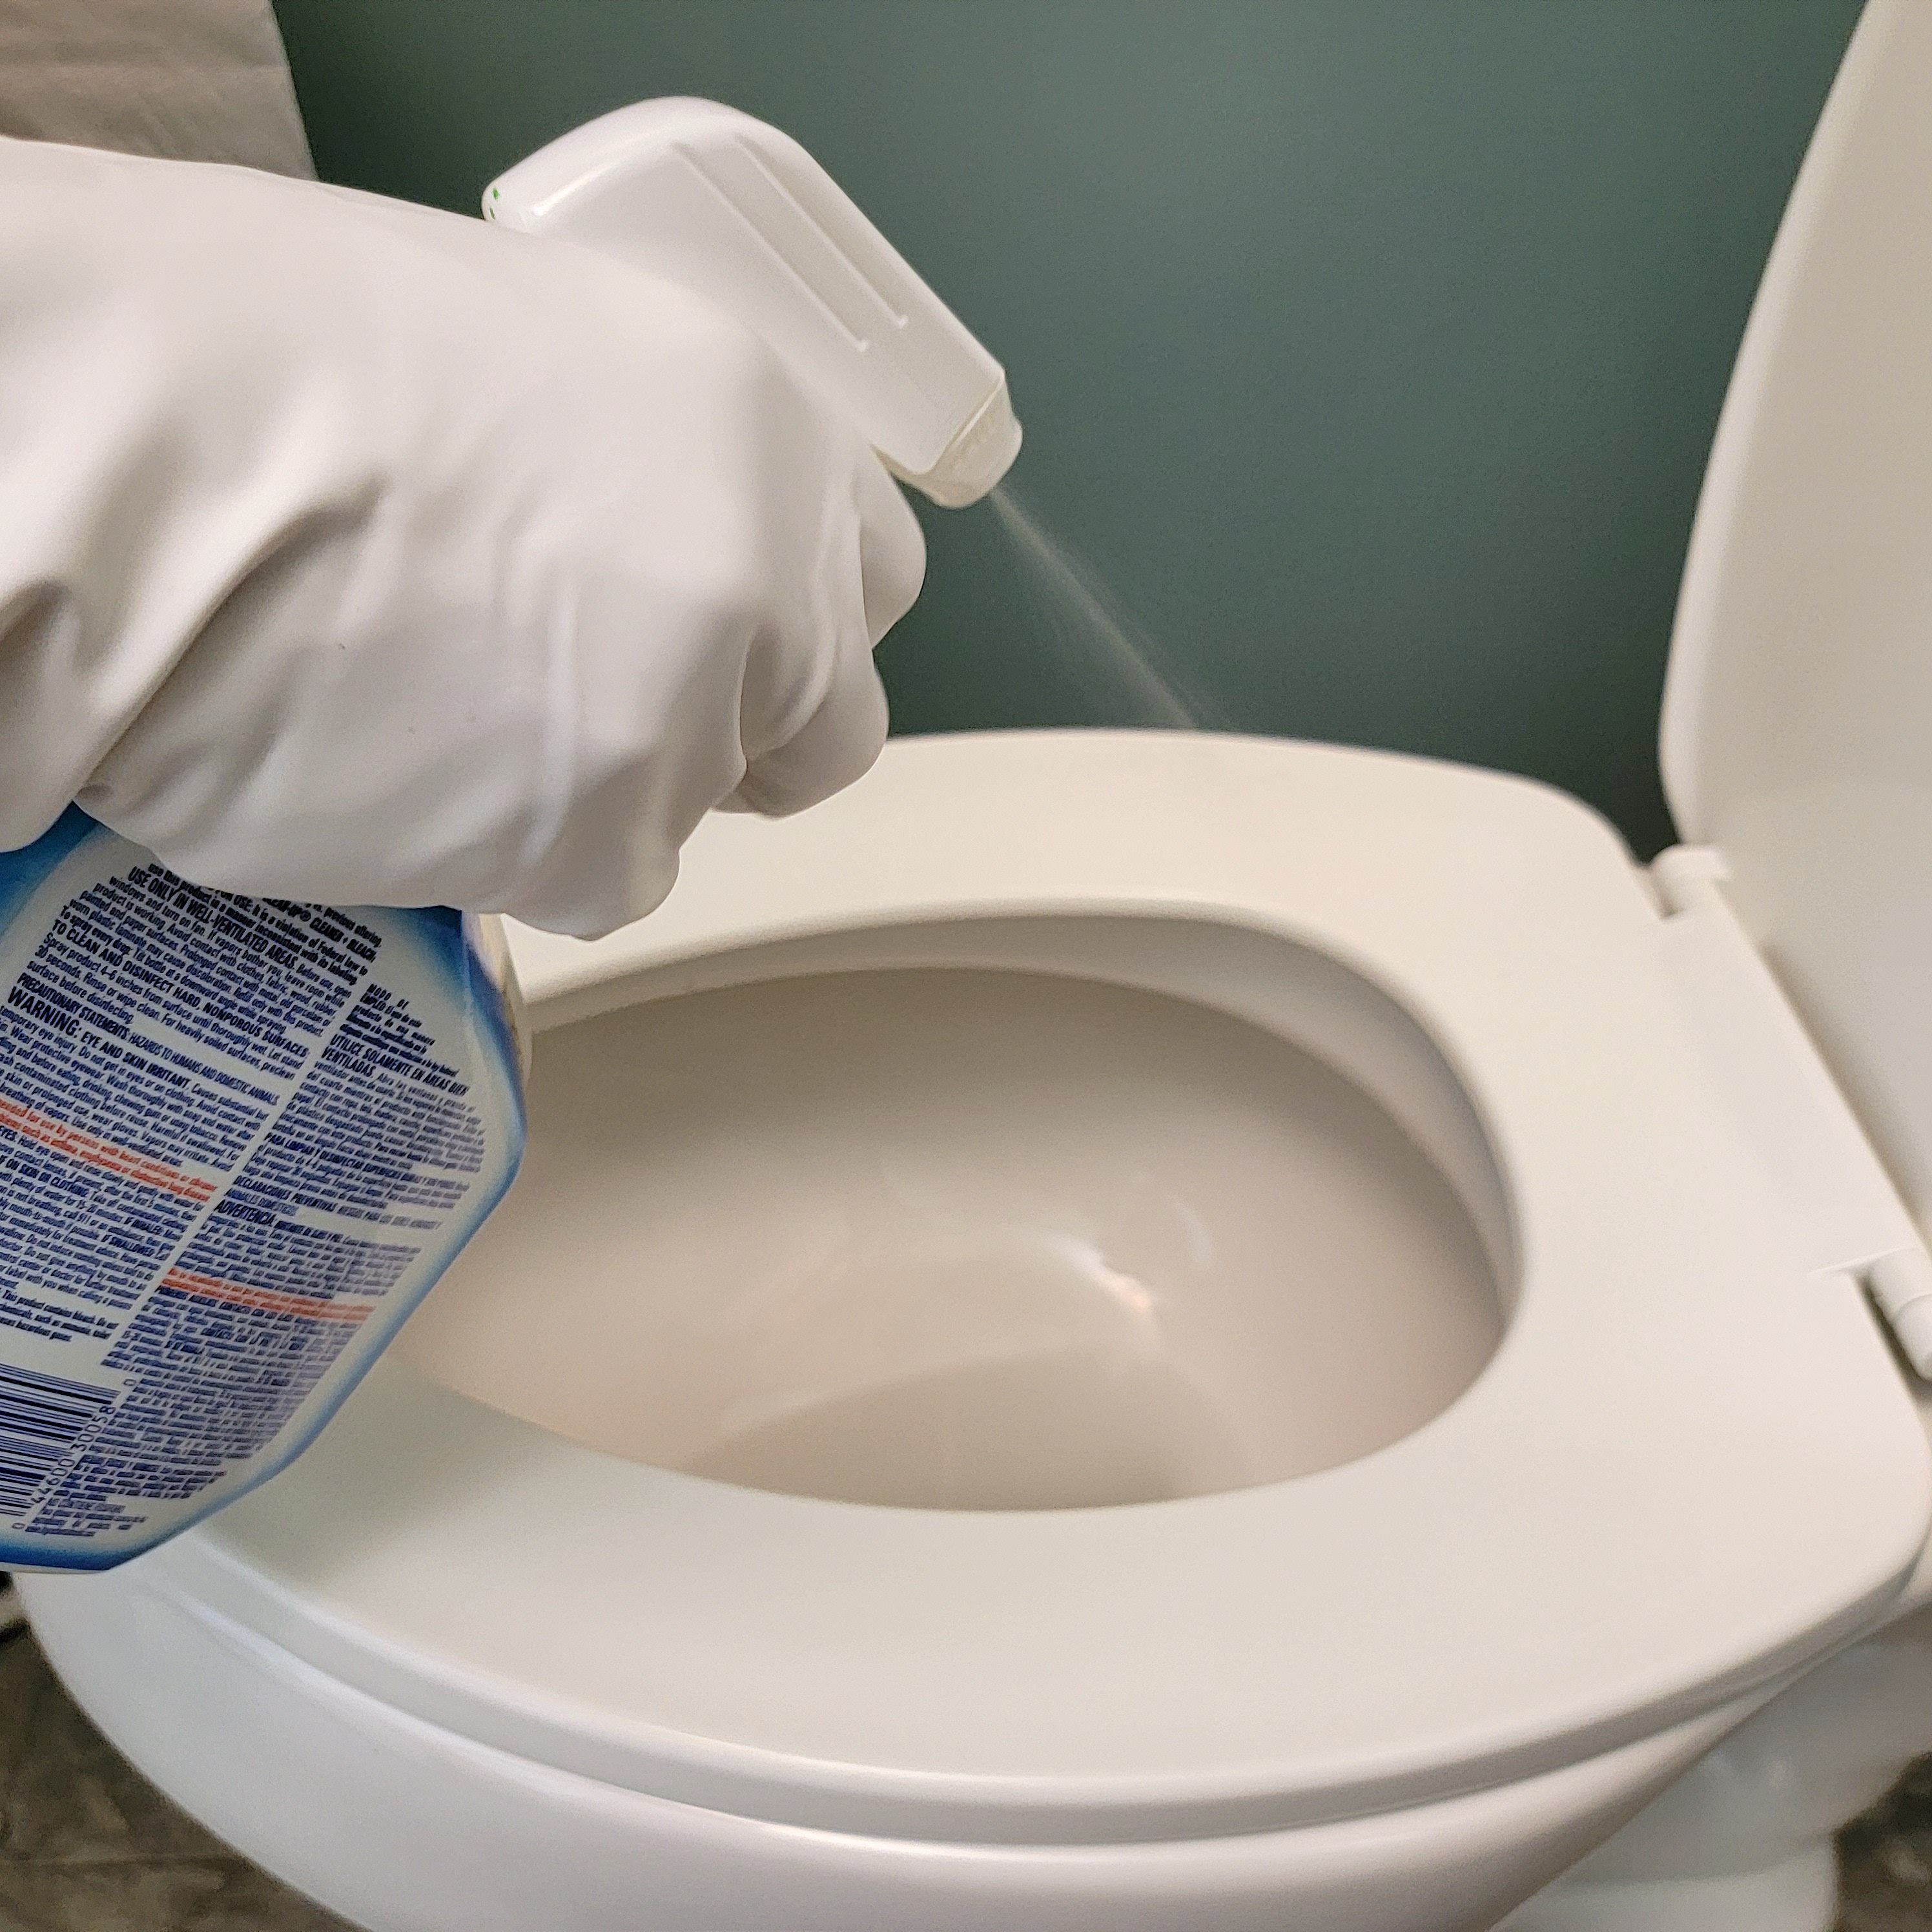 Flush Your Fears Goodbye with 4 Easy Steps To Clean a Toilet.